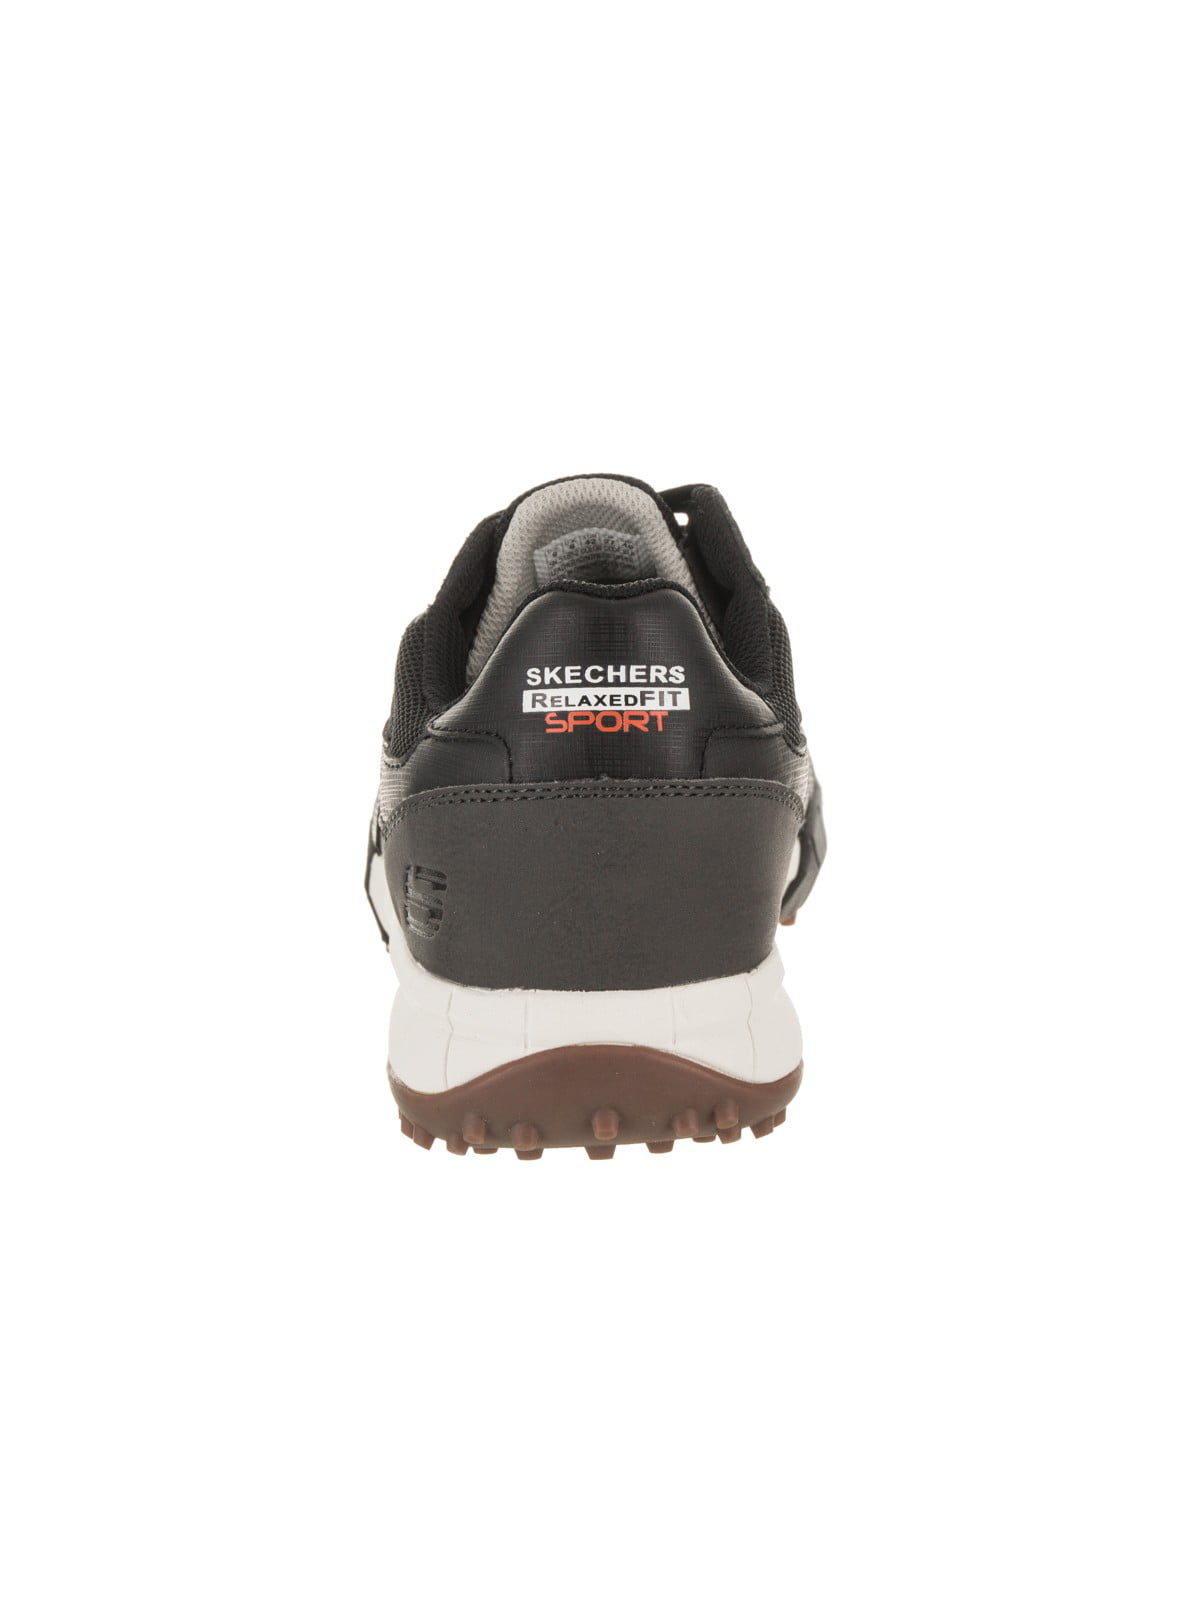 skechers floater review